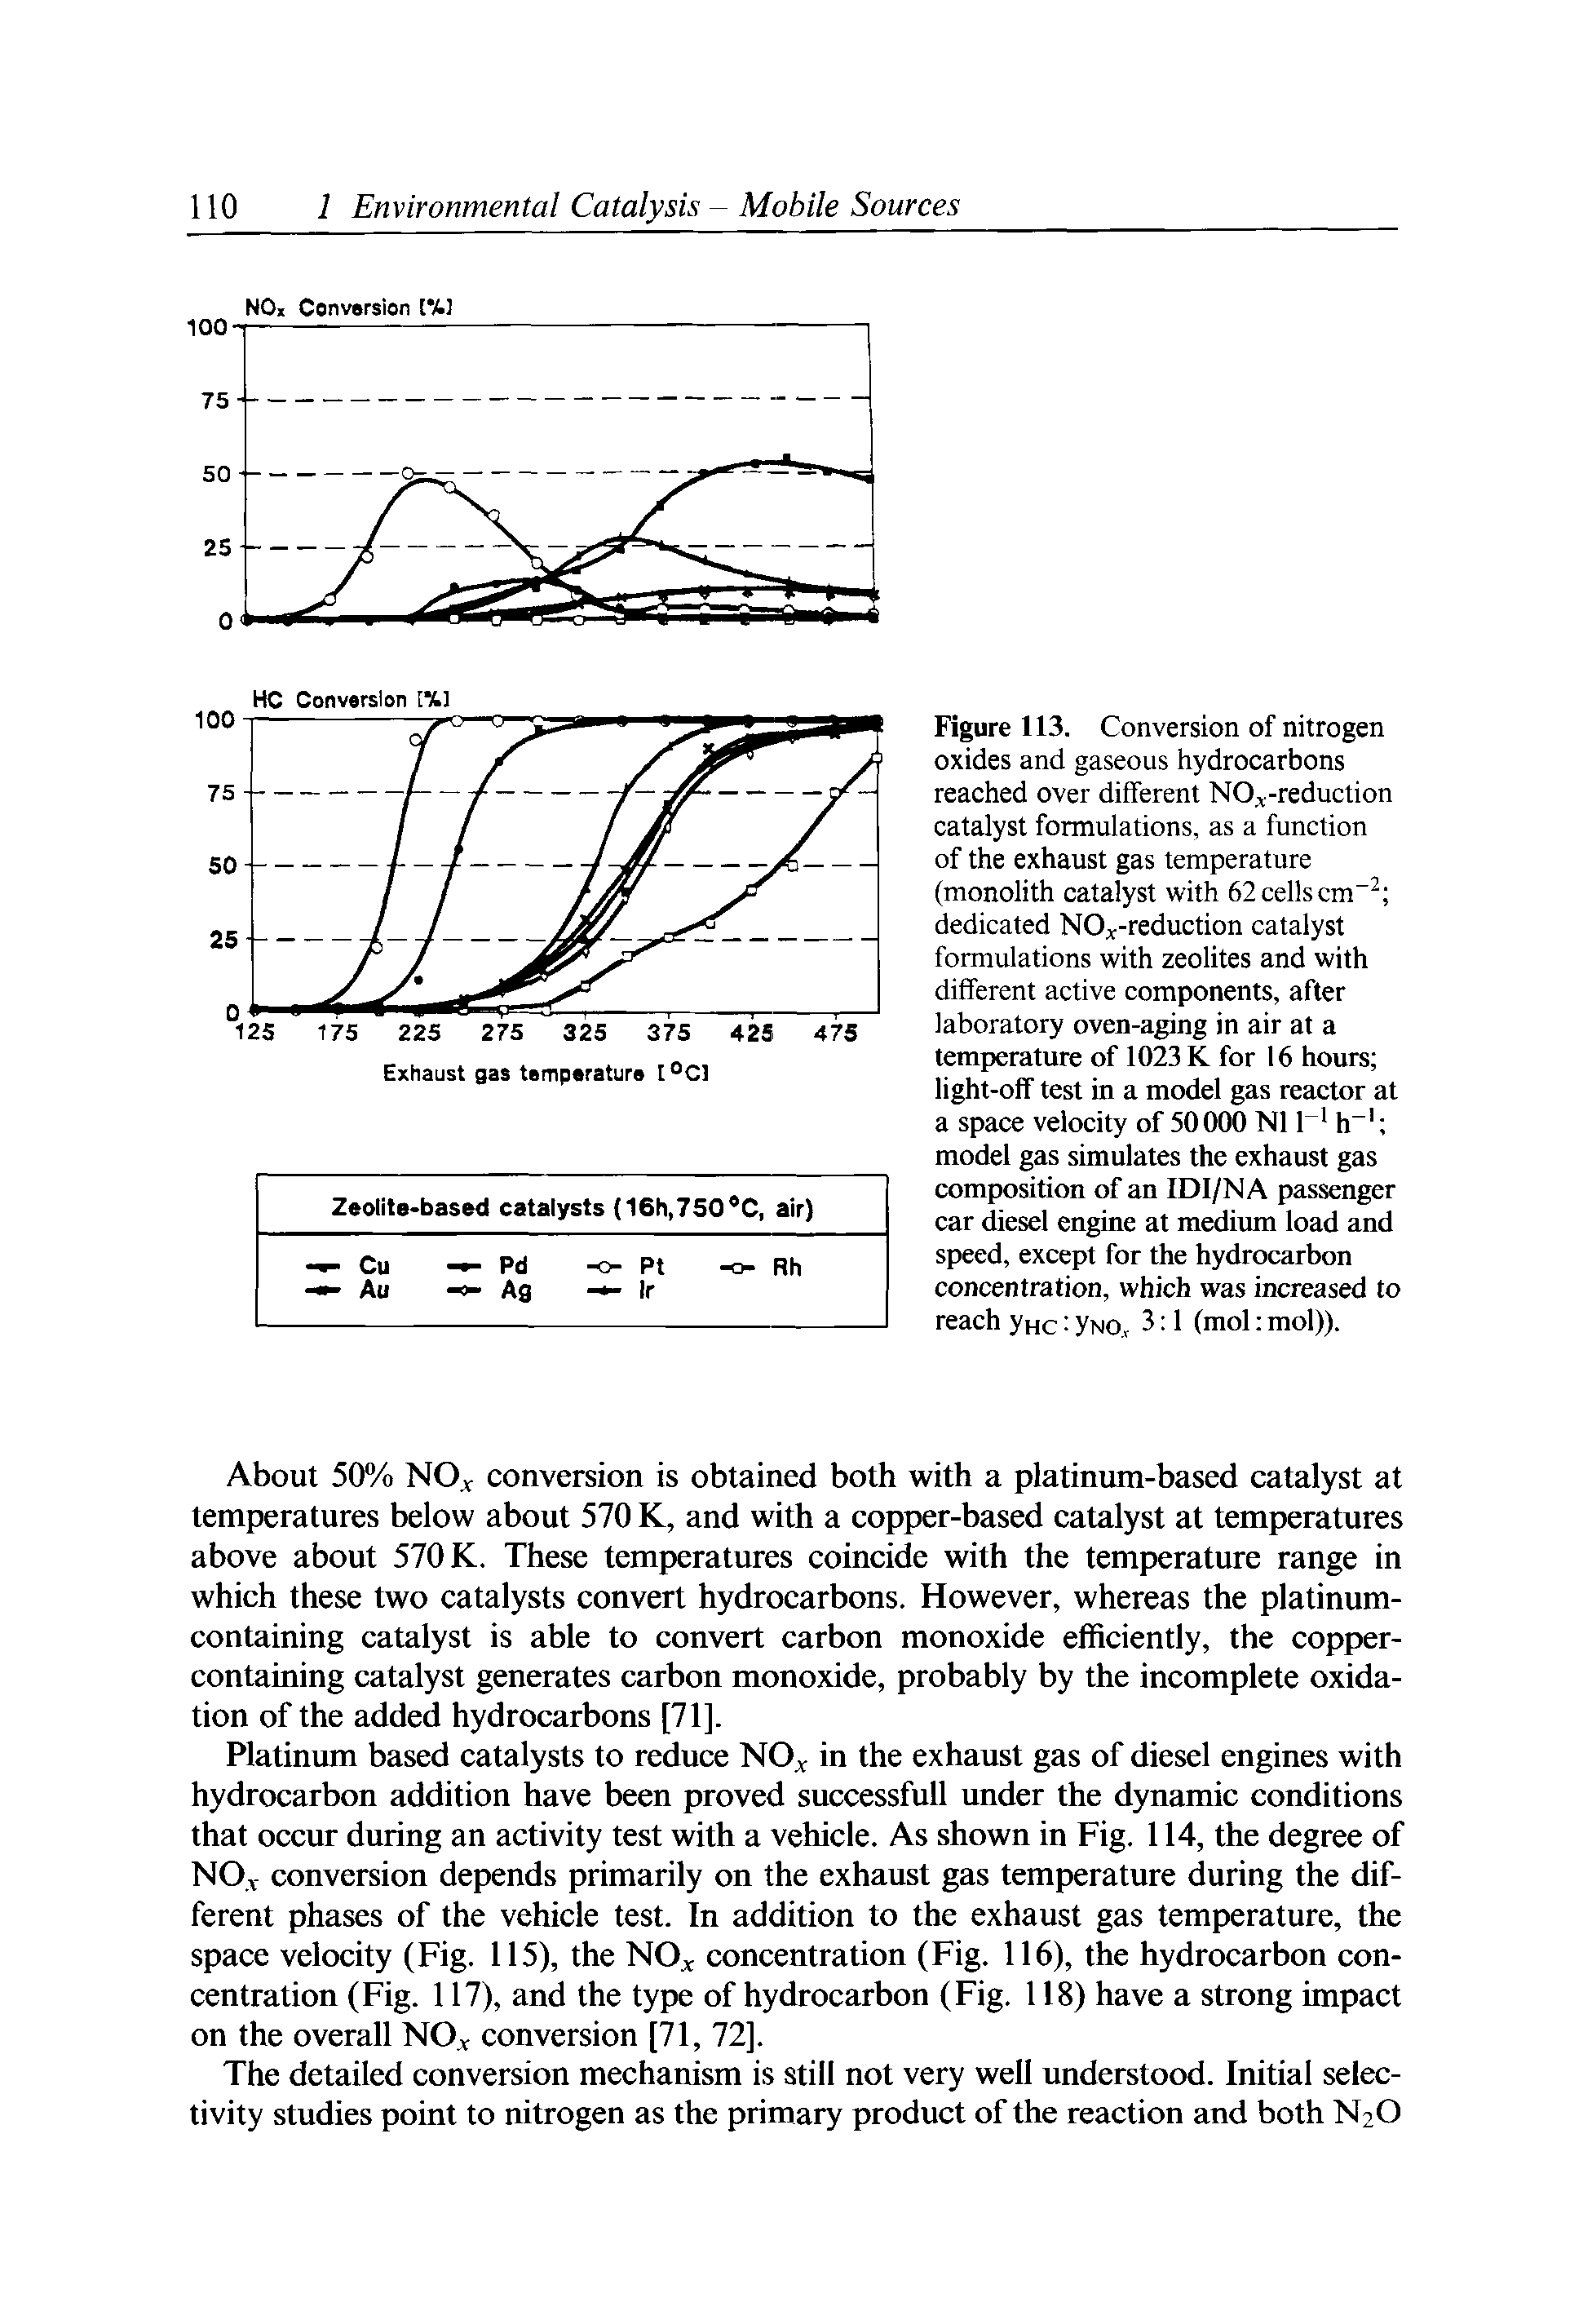 Figure 113. Conversion of nitrogen oxides and gaseous hydrocarbons reached over different NO.v-reduction catalyst formulations, as a function of the exhaust gas temperature (monolith catalyst with 62 cells cm dedicated NO t-reduction catalyst formulations with zeolites and with different active components, after laboratory oven-aging in air at a temperature of 1023 K for 16 hours light-off test in a model gas reactor at a space velocity of 50000 N11 h model gas simulates the exhaust gas composition of an IDl/NA passenger car diesel engine at medium load and speed, except for the hydrocarbon concentration, which was increased to reach yHc yNO, 3 1 (mol mol)).